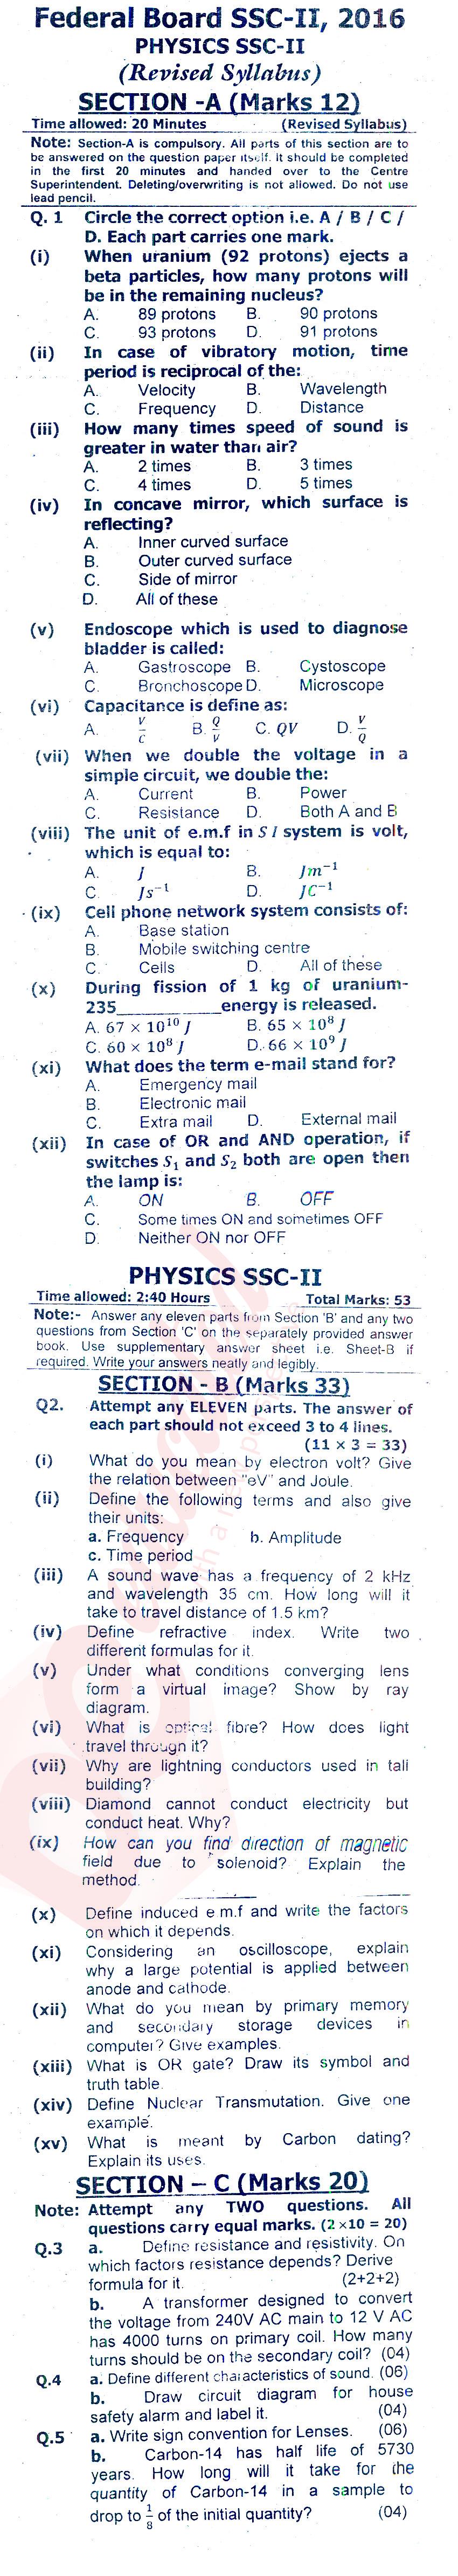 Physics 10th class Past Paper Group 1 Federal BISE  2016